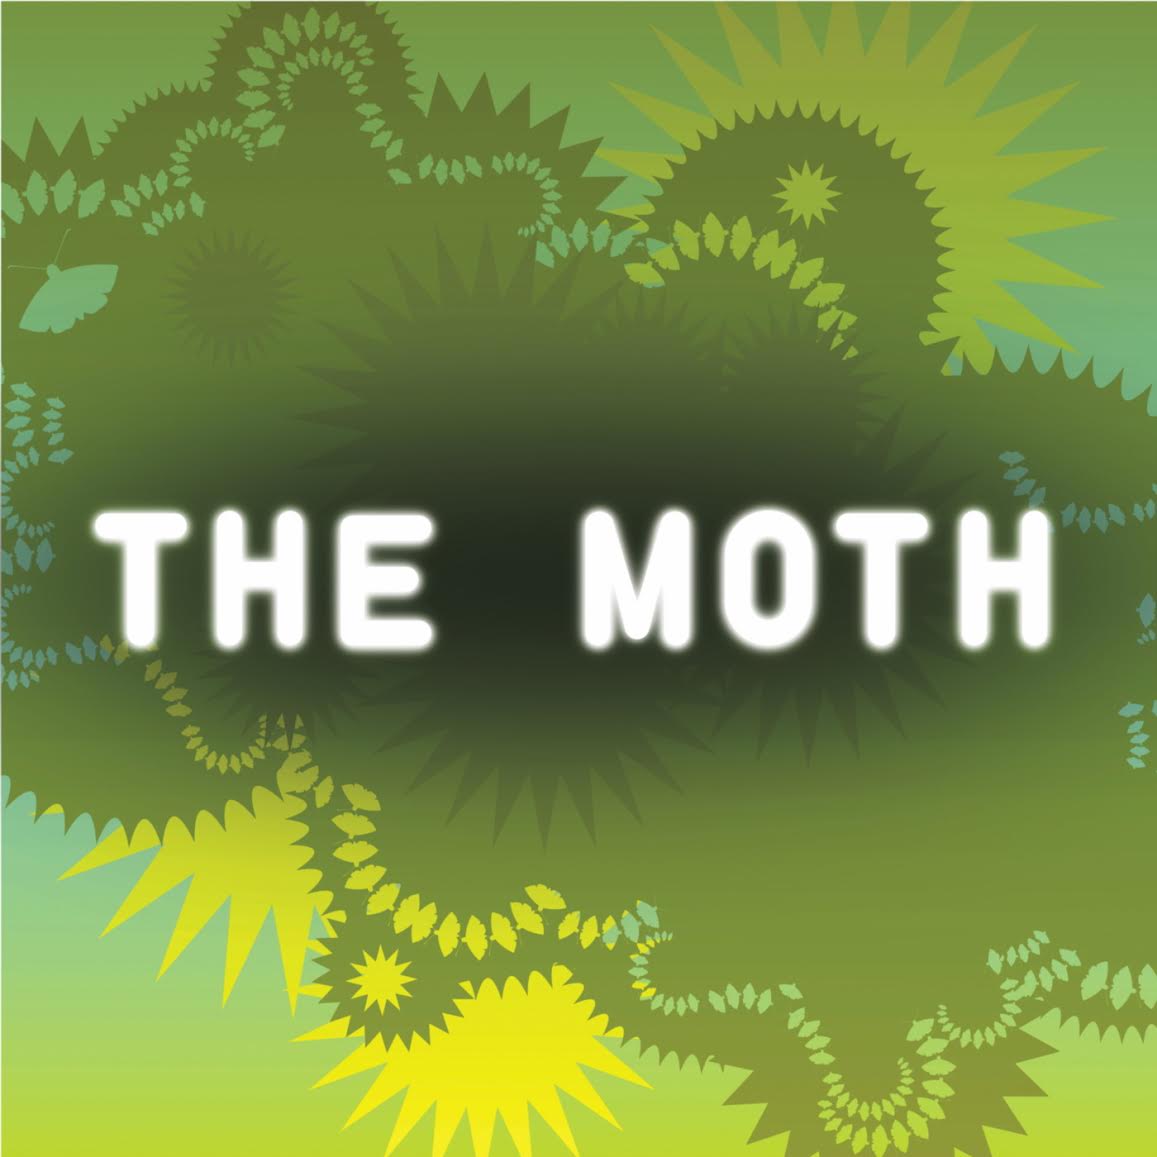 The Moth will draw you in with illuminating stories